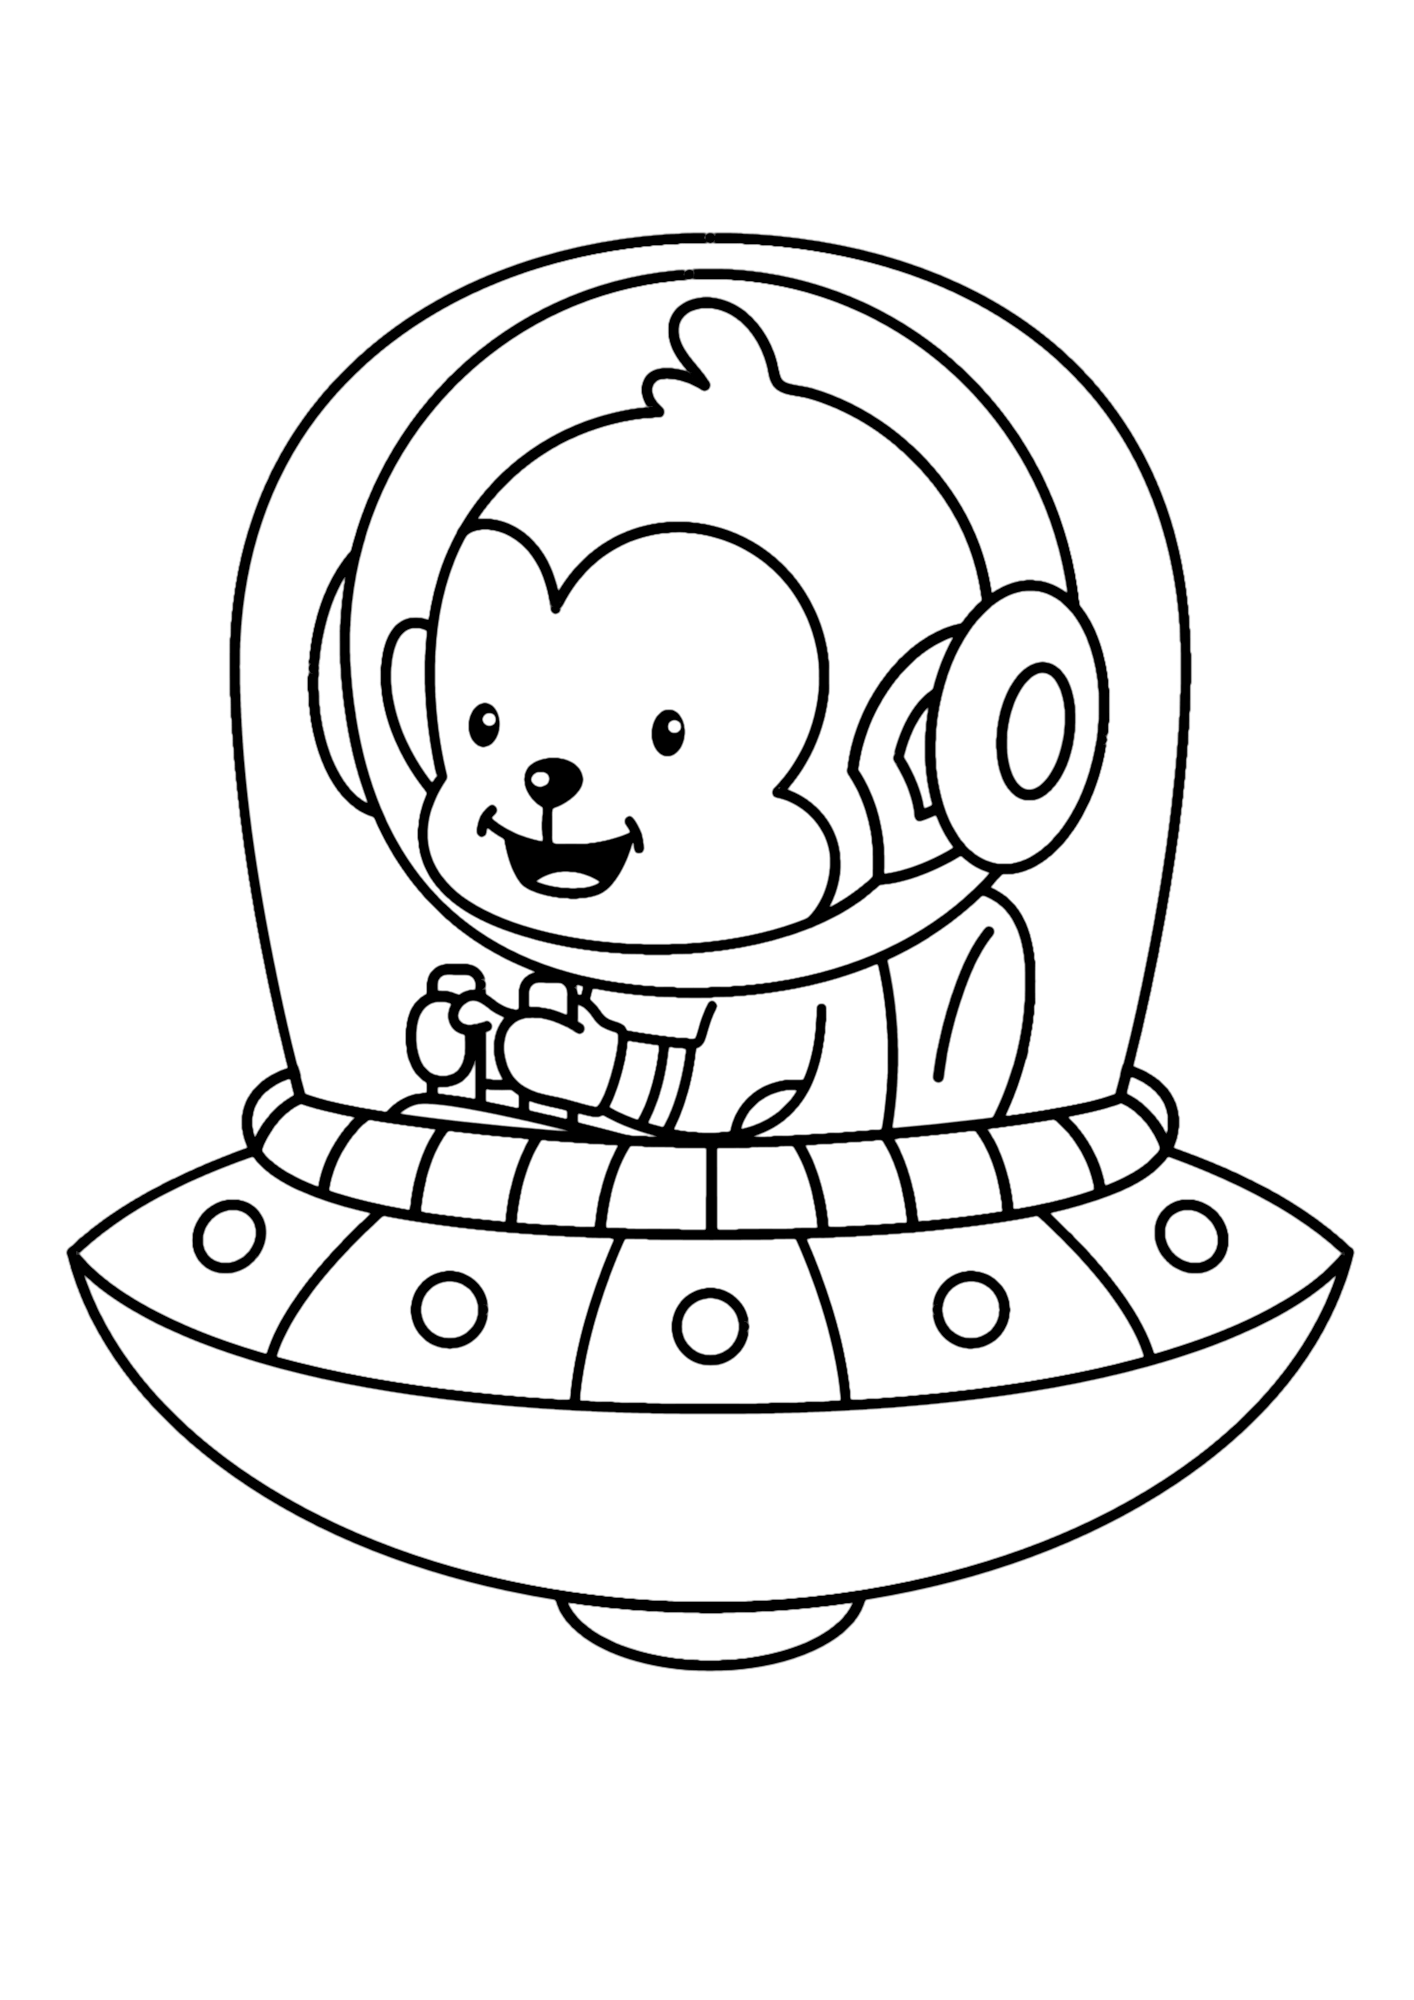 Astronaut Monkey Coloring Page